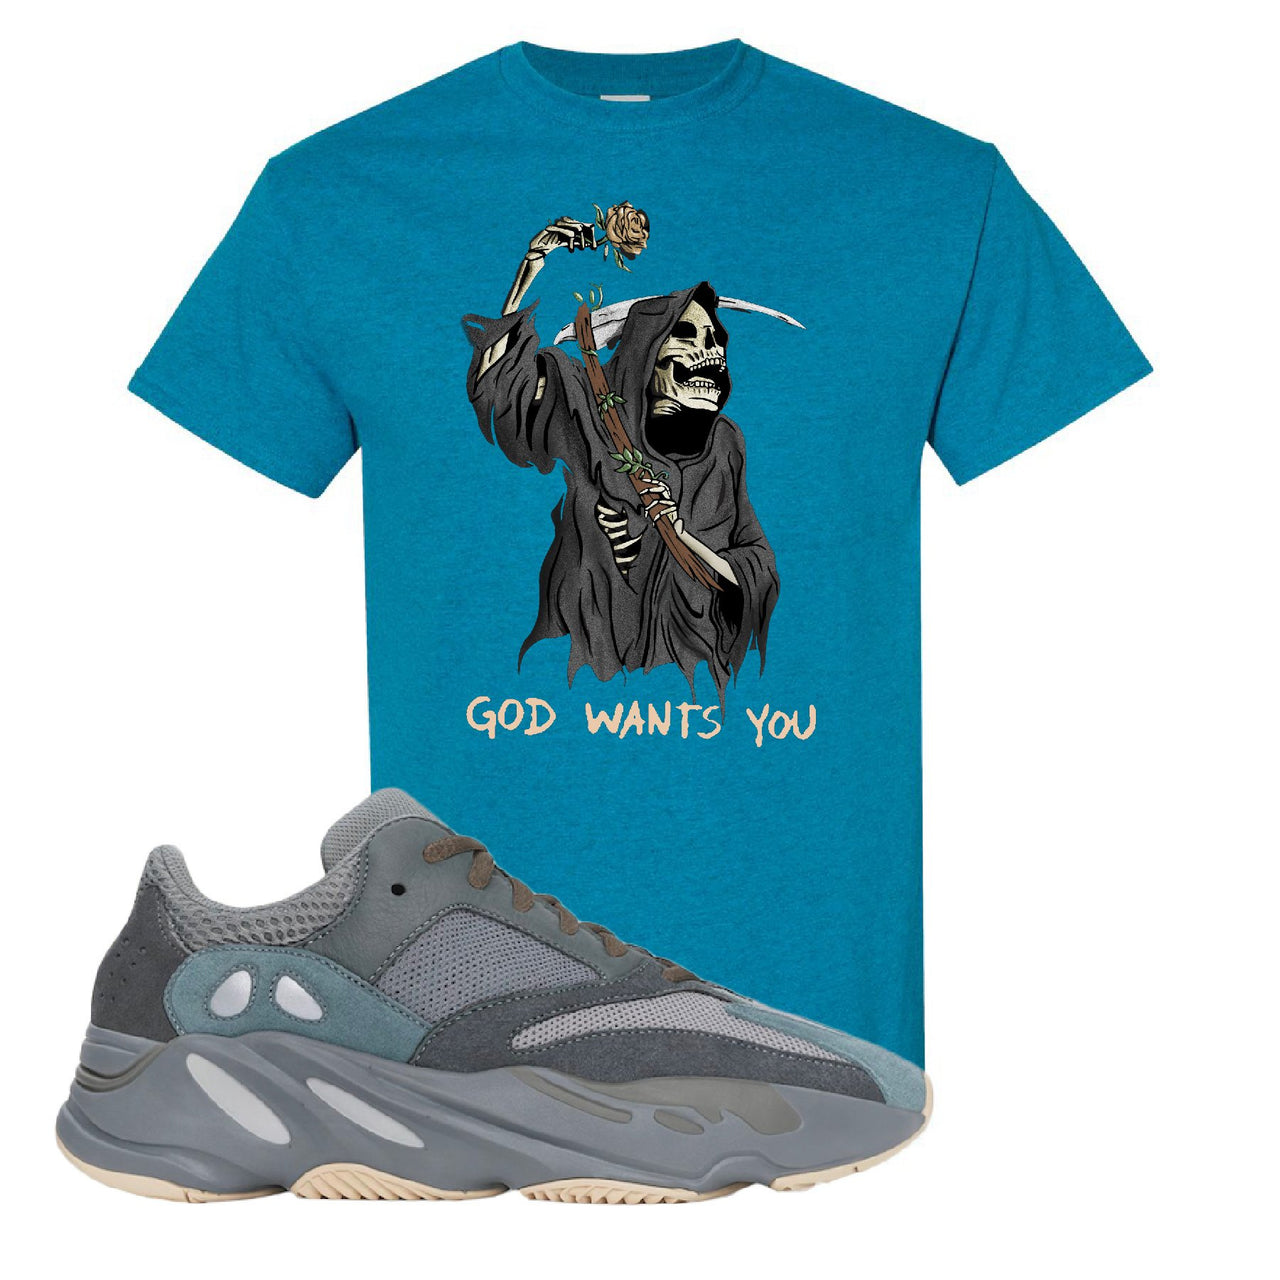 Yeezy Boost 700 Teal Blue God Wants You Reaper Antique Saphire Sneaker Hook Up T-Shirt